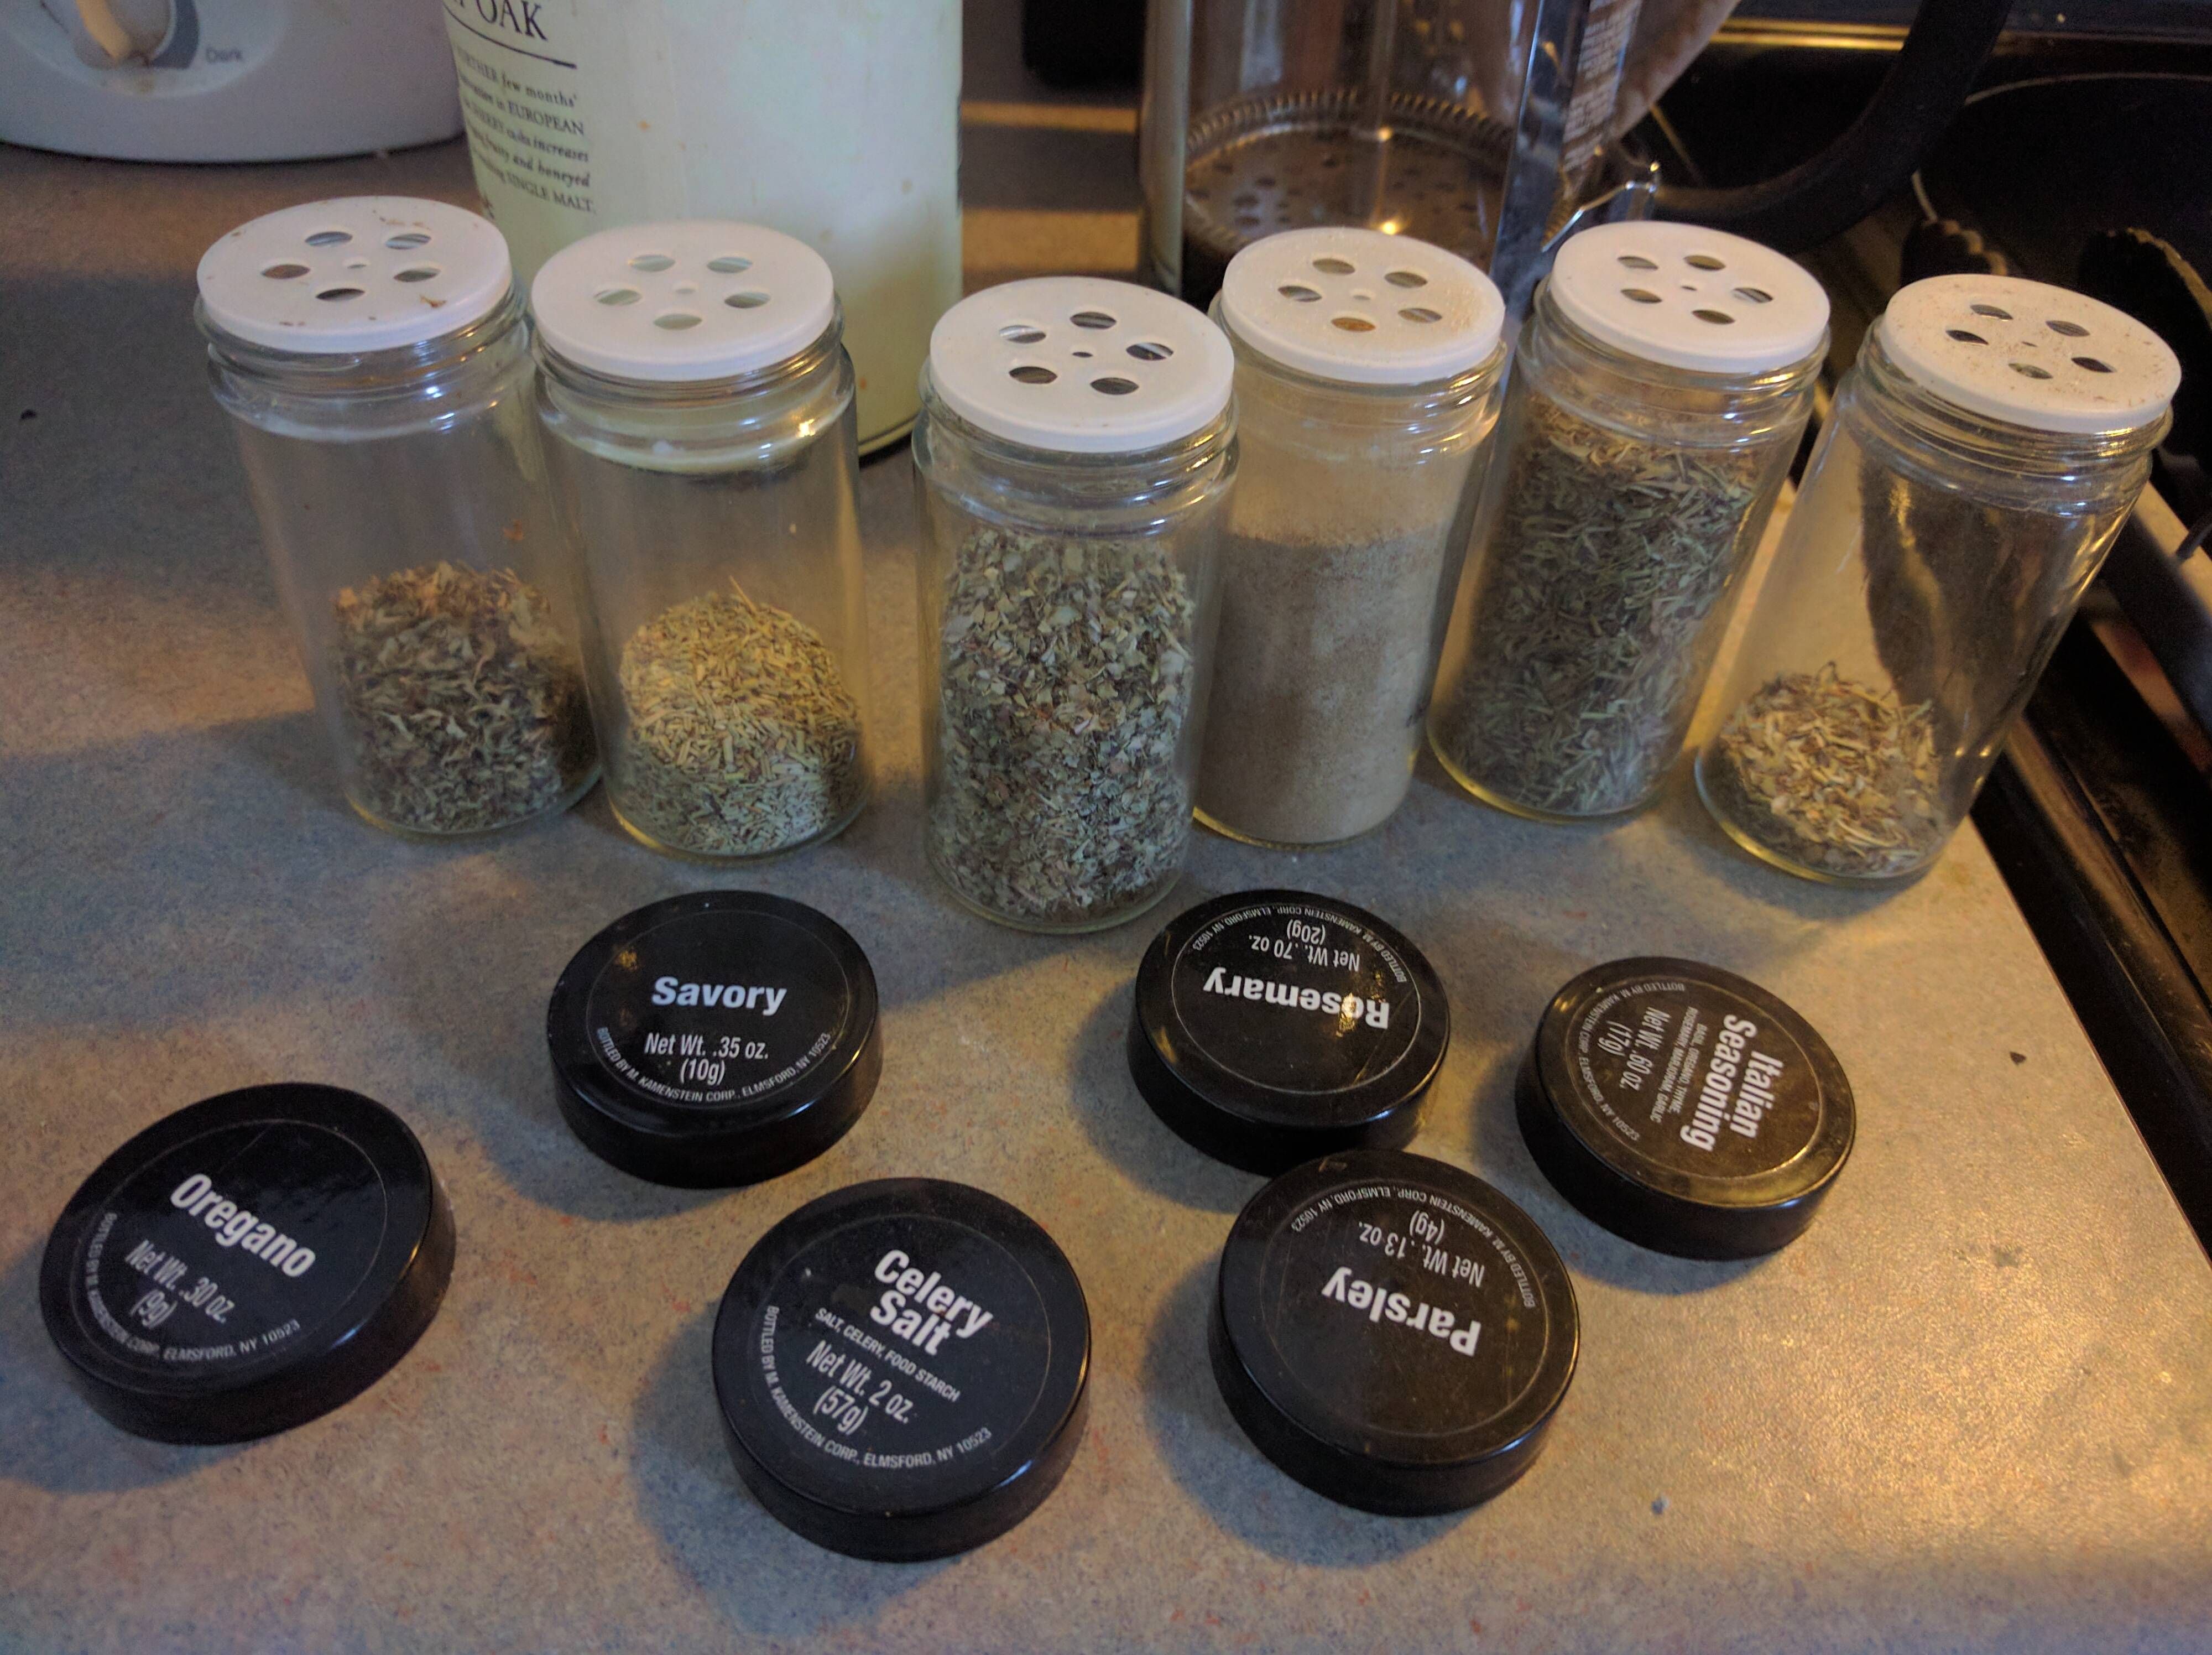 Pro tip: When cooking, don't remove all the spice lids at the same time.